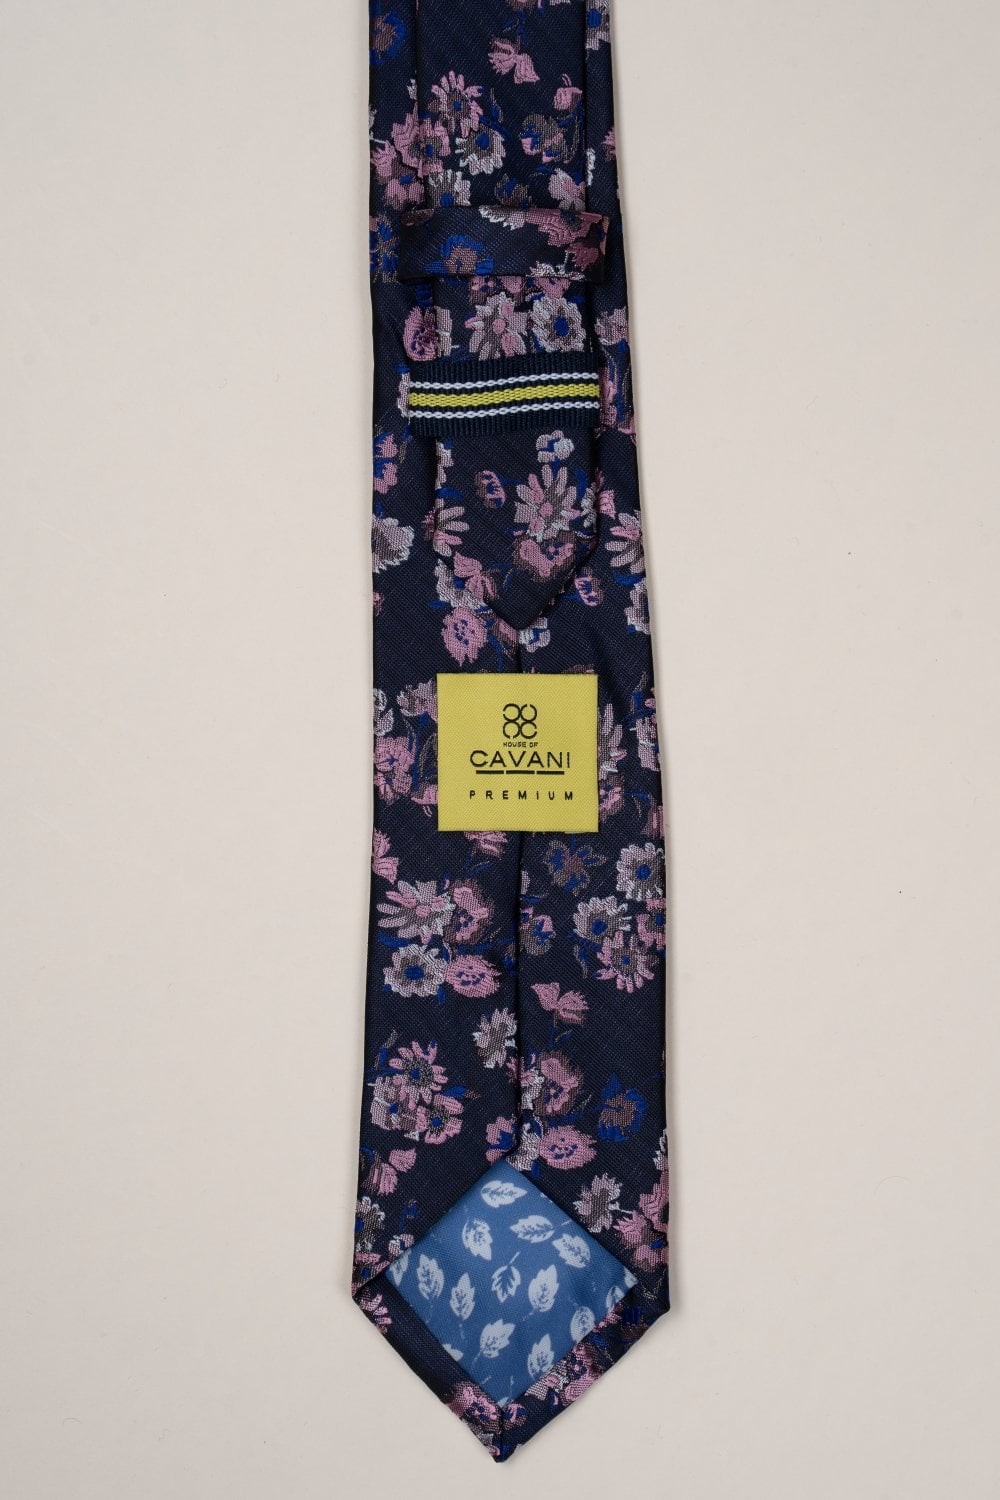 Men's Floral Patterned Tie  - Navy and Pink